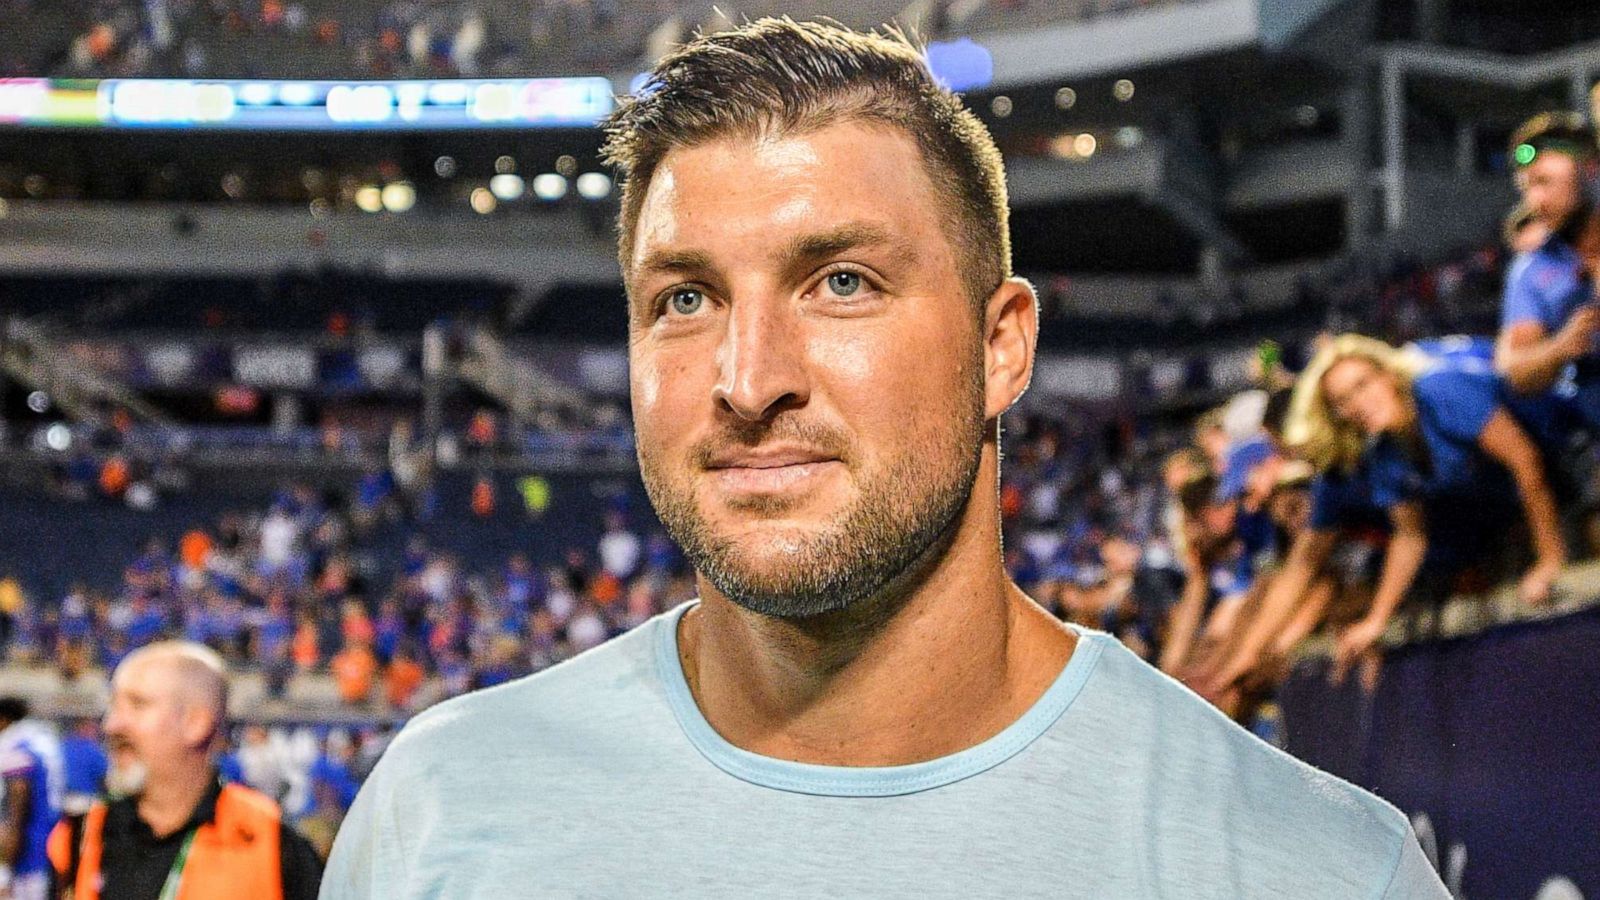 PHOTO: Tim Tebow attends the game between the Florida Gators and the Miami Hurricanes at Camping World Stadium, Aug. 24, 2019, in Orlando, Fla.